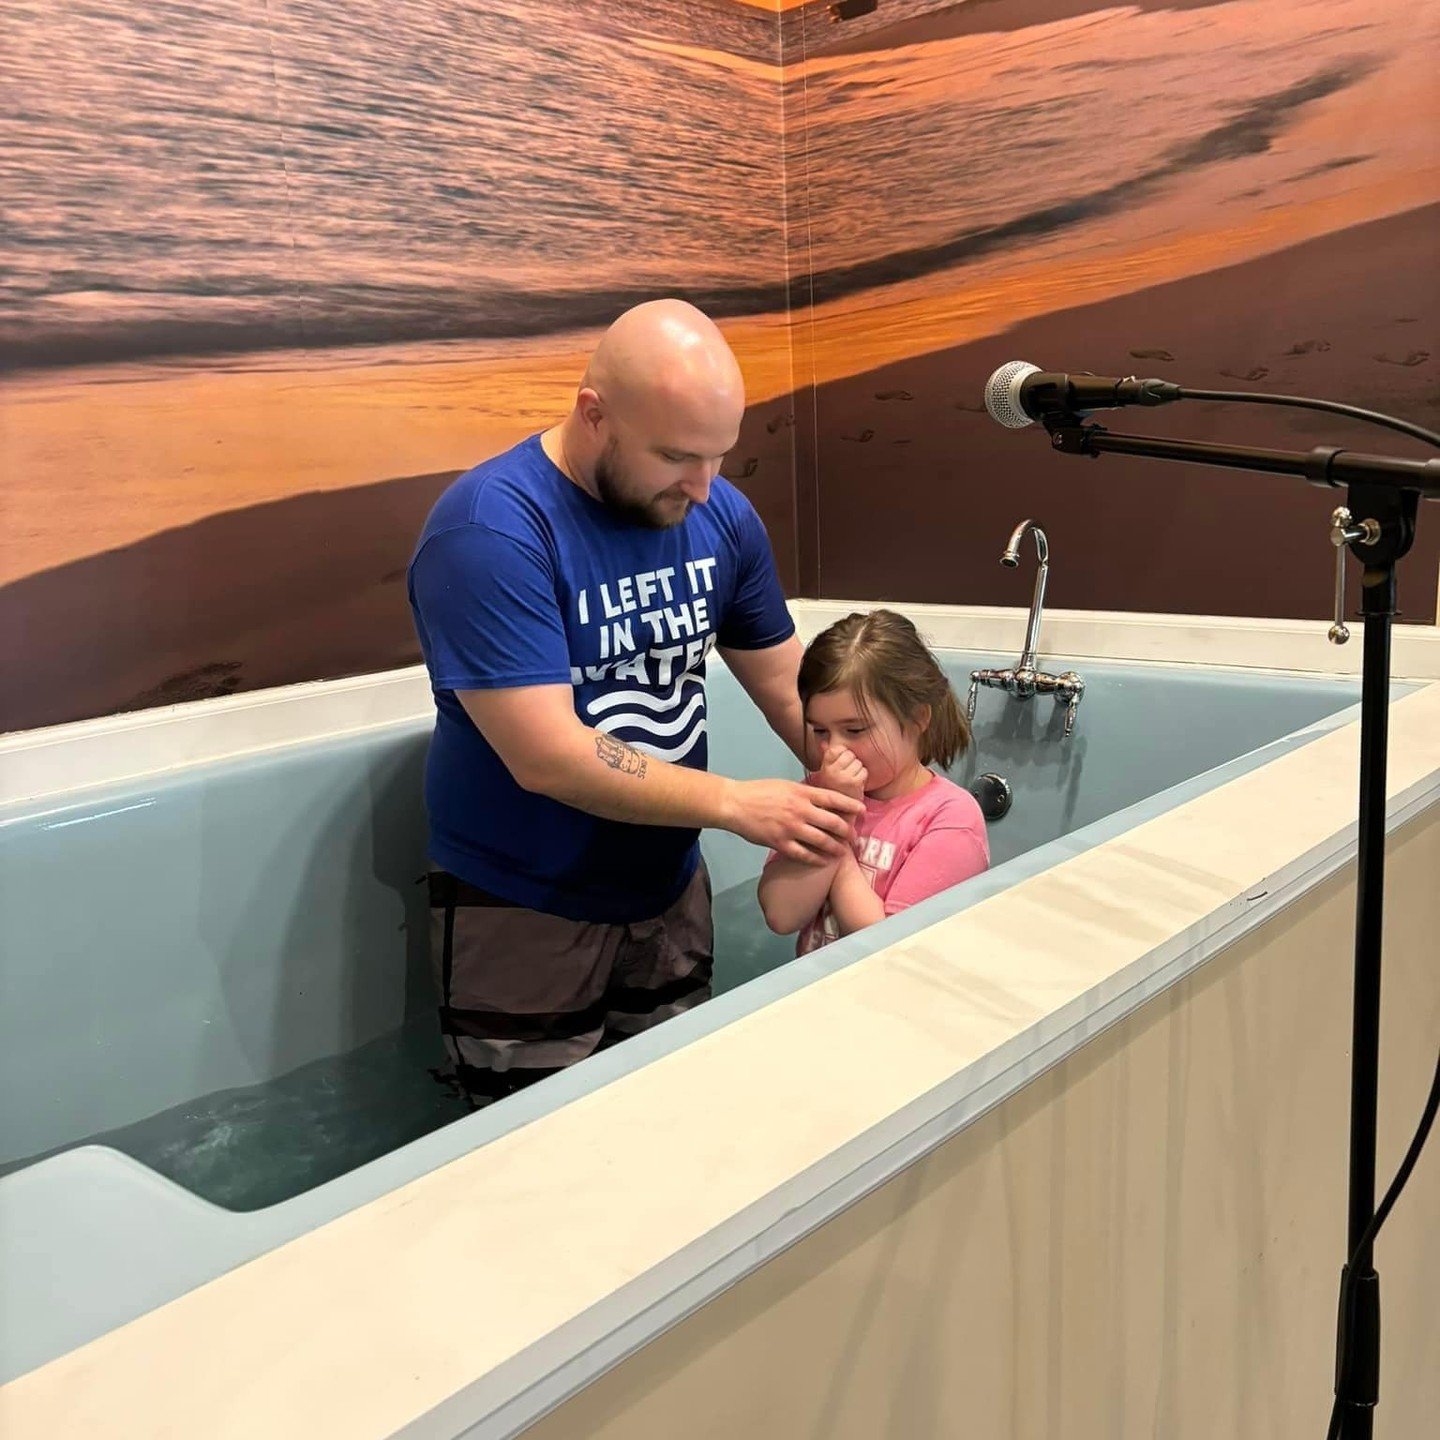 Baptism Sunday! We love seeing lives changed!